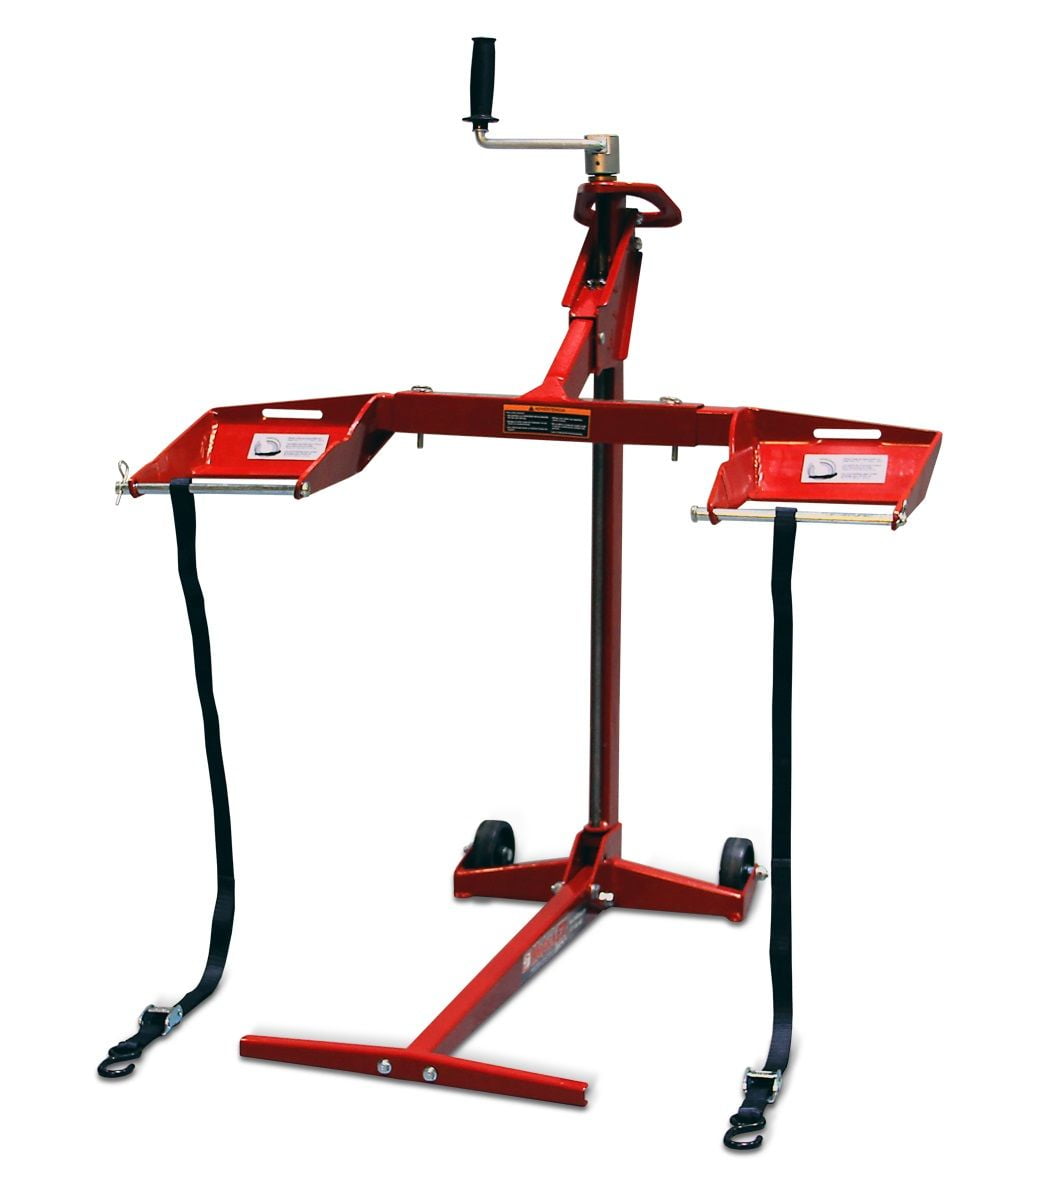 Pro-Lift Lawn Mower Lift 350 Pound Capacity Solid Steel Effortless Lifting Jack 